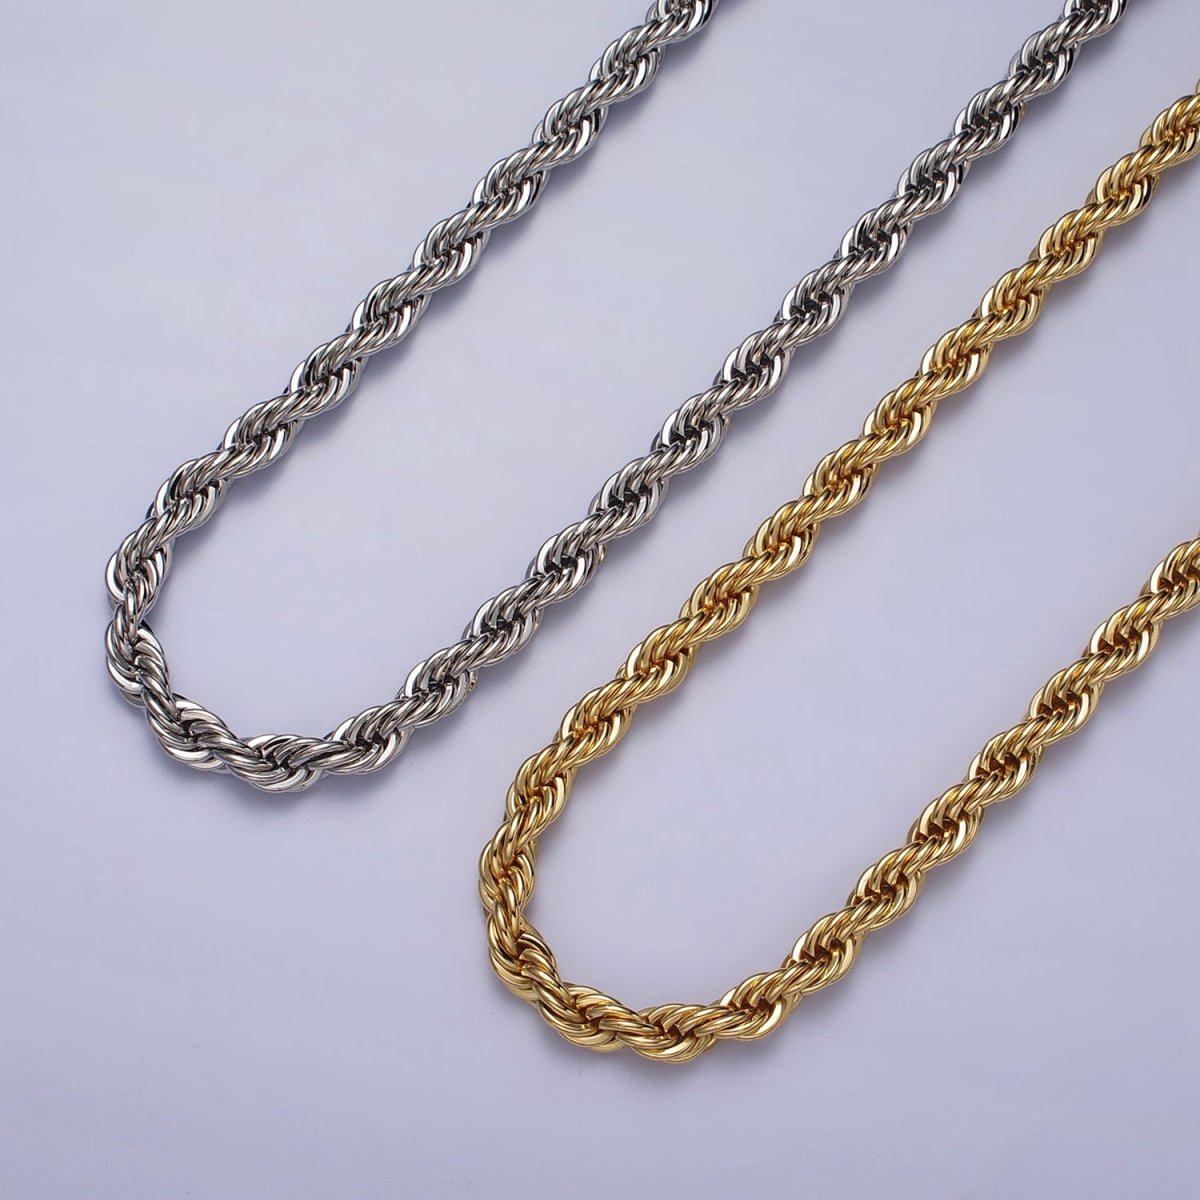 Unisex Bold Gold Rope necklace, Thick Chunky chain necklace 5.5mm Twist Necklace 17", 19.5 inch + 2 inch extender | WA-1528 WA-1529 WA-1530 Clearance Pricing - DLUXCA